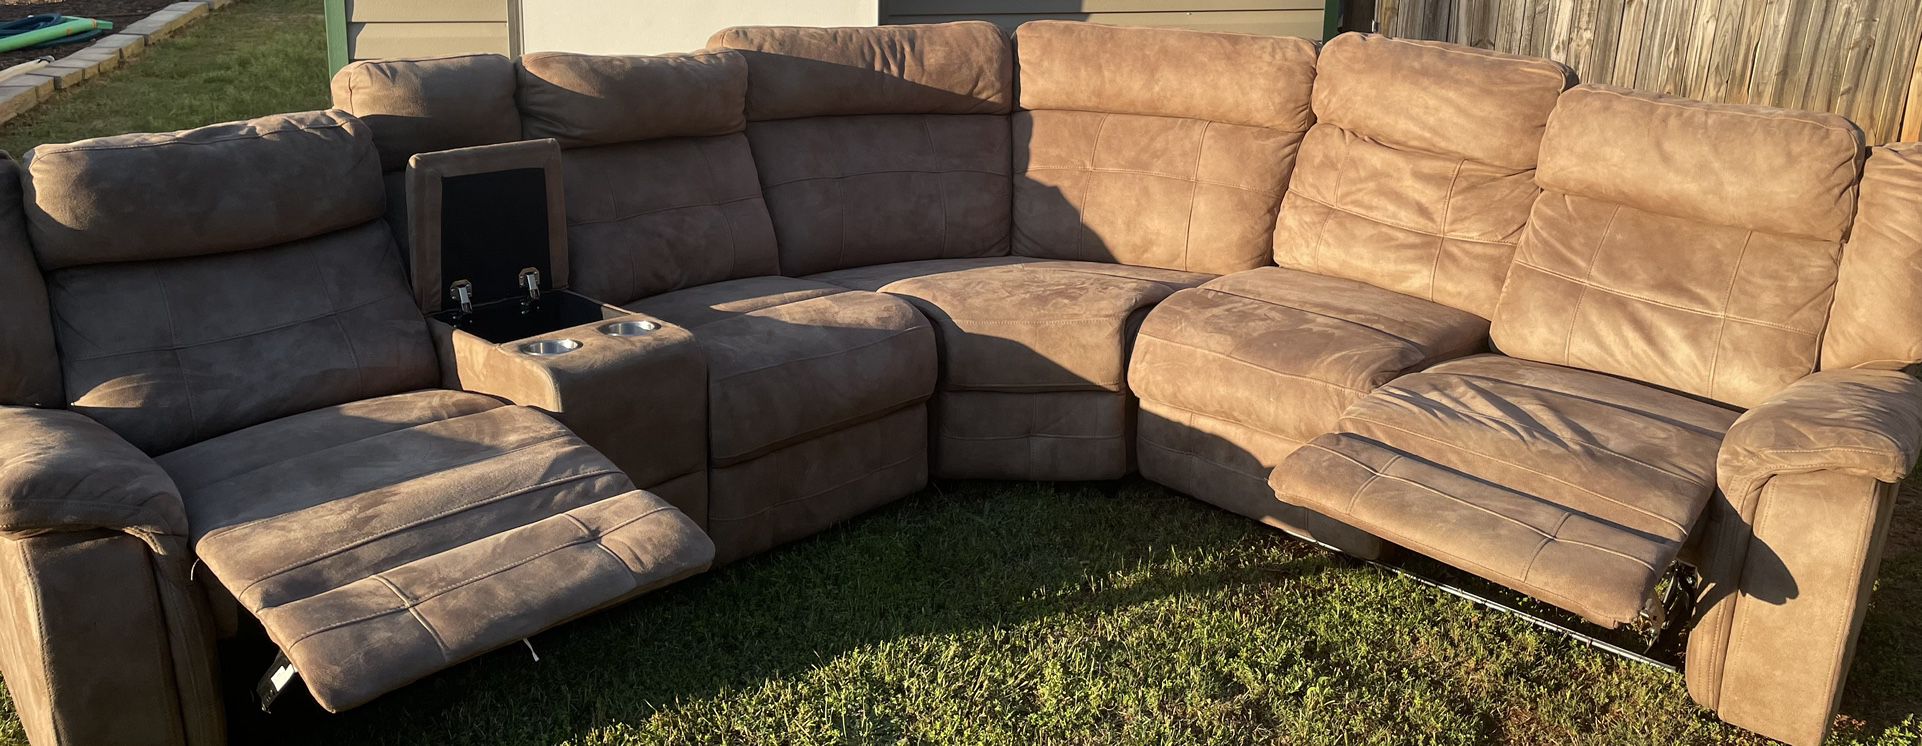 Beige/Tan Double Reclining Sectional Couch